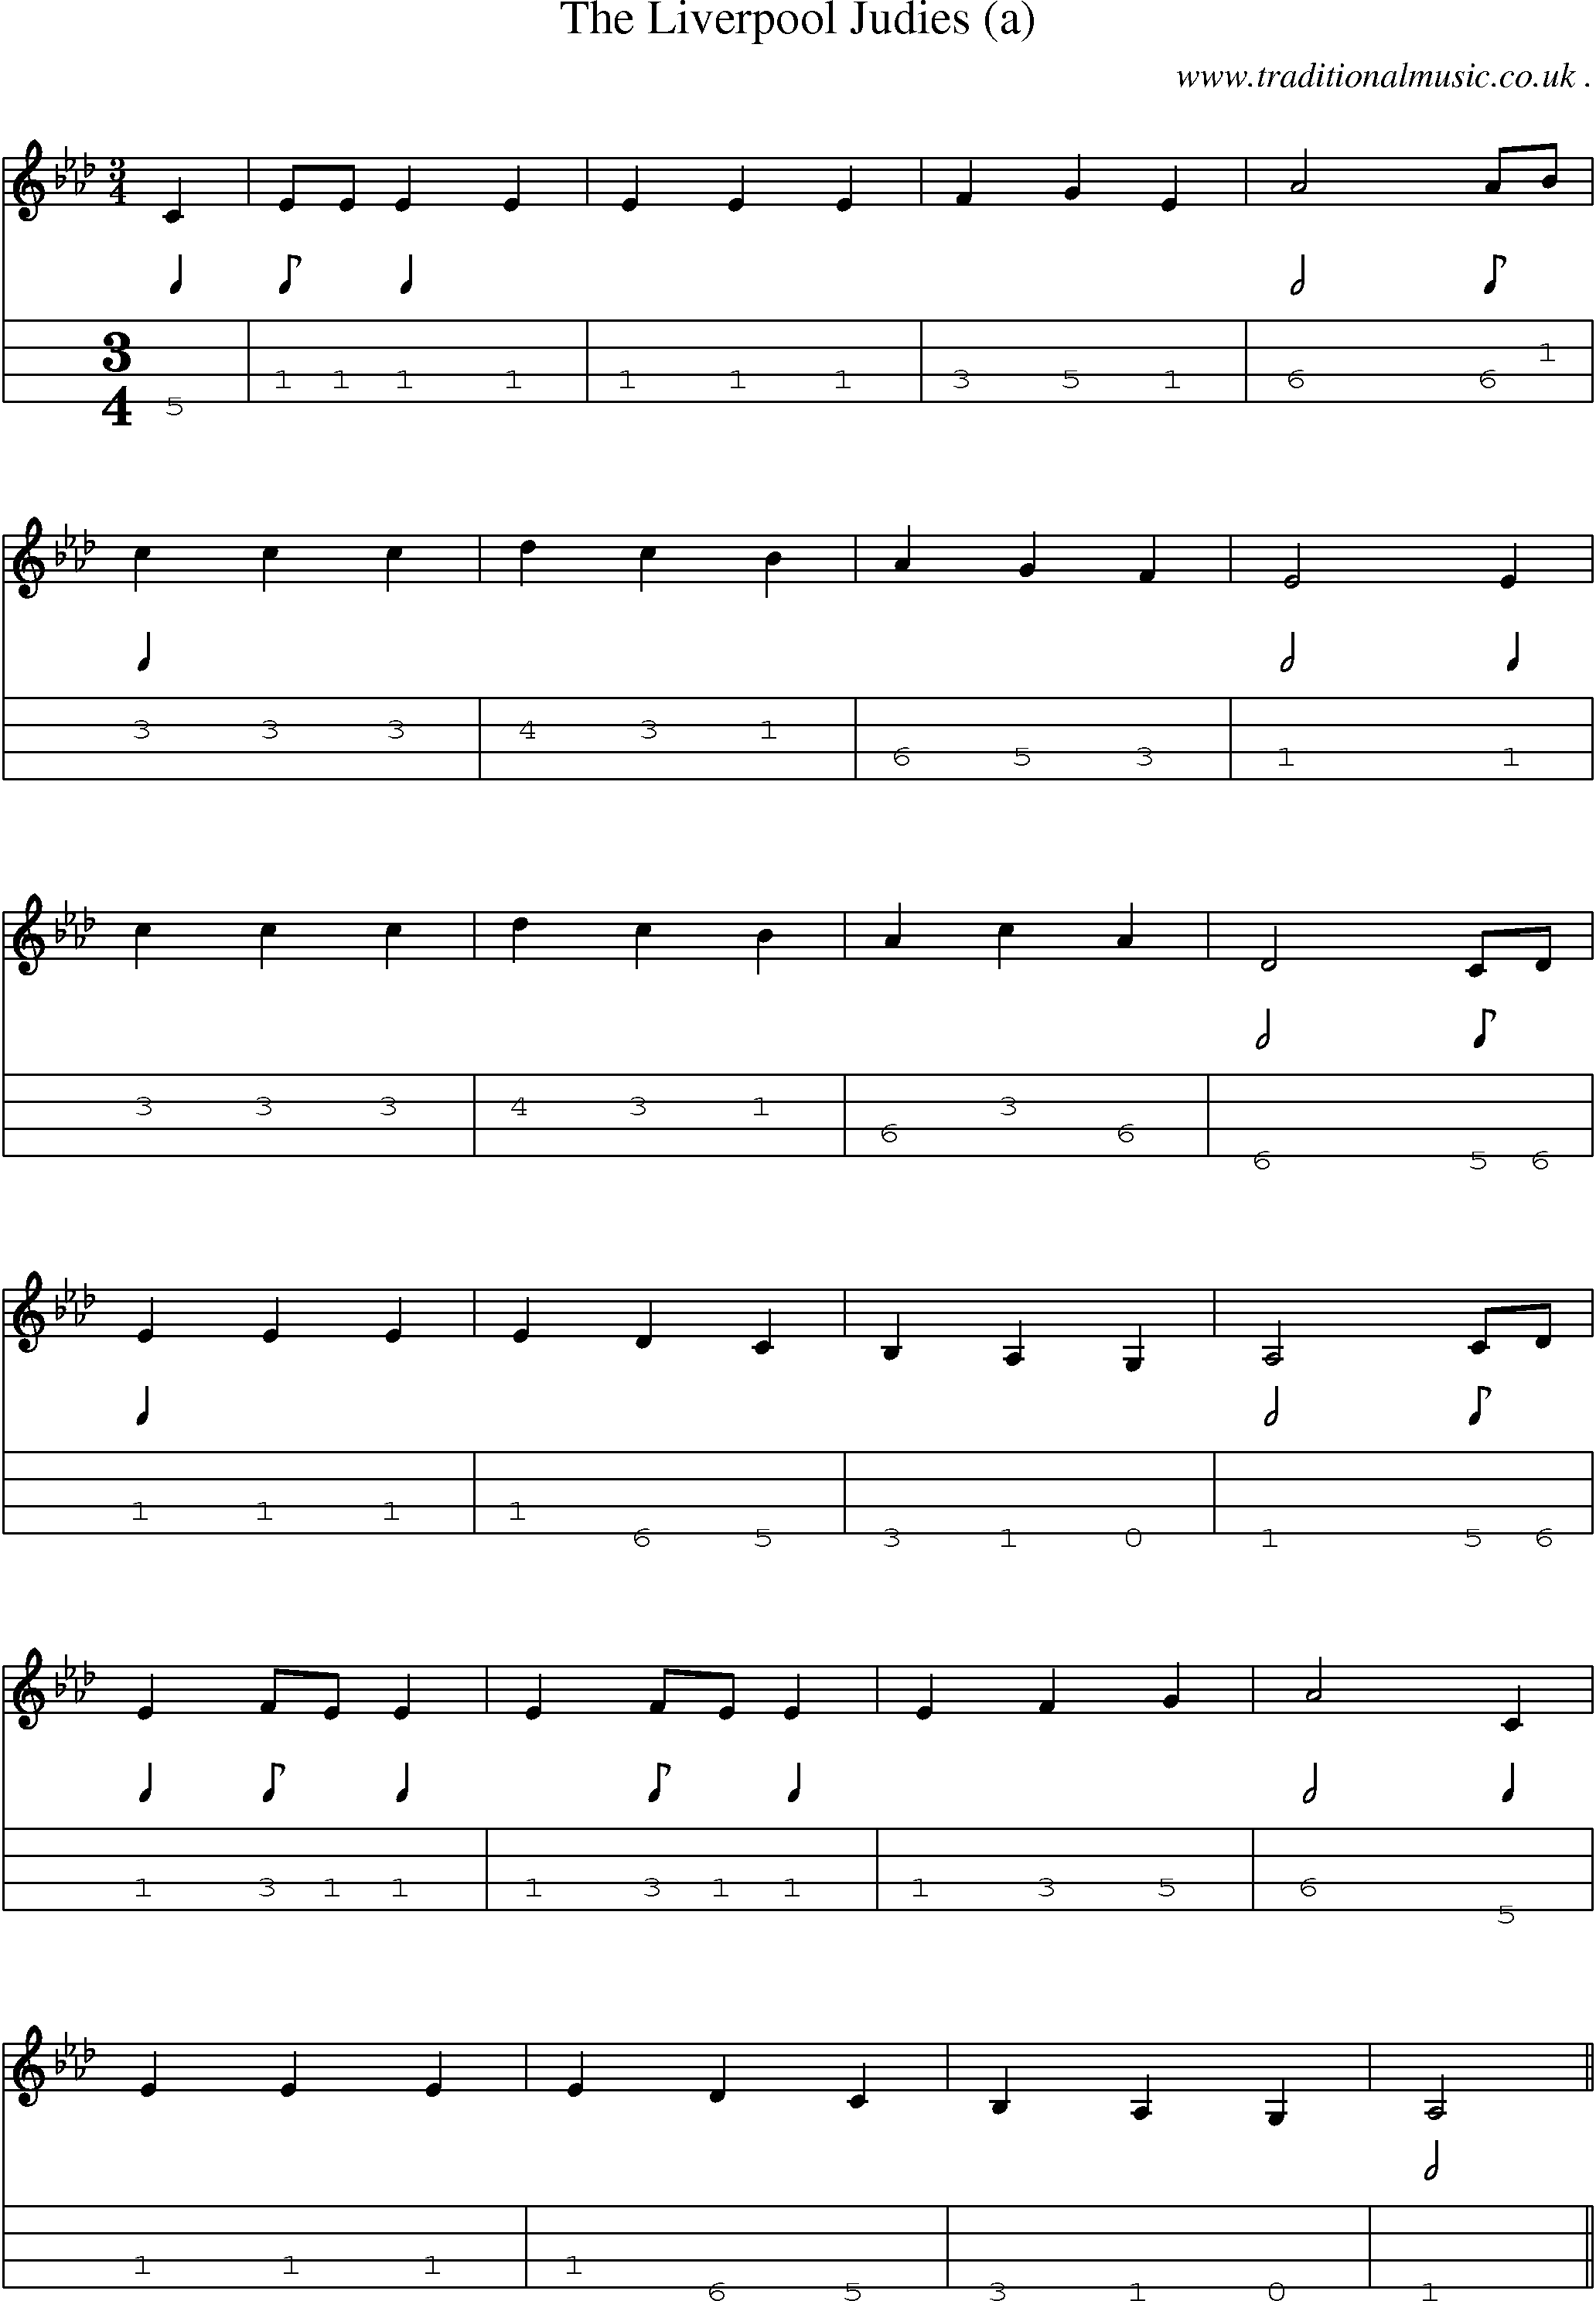 Sheet-Music and Mandolin Tabs for The Liverpool Judies (a)